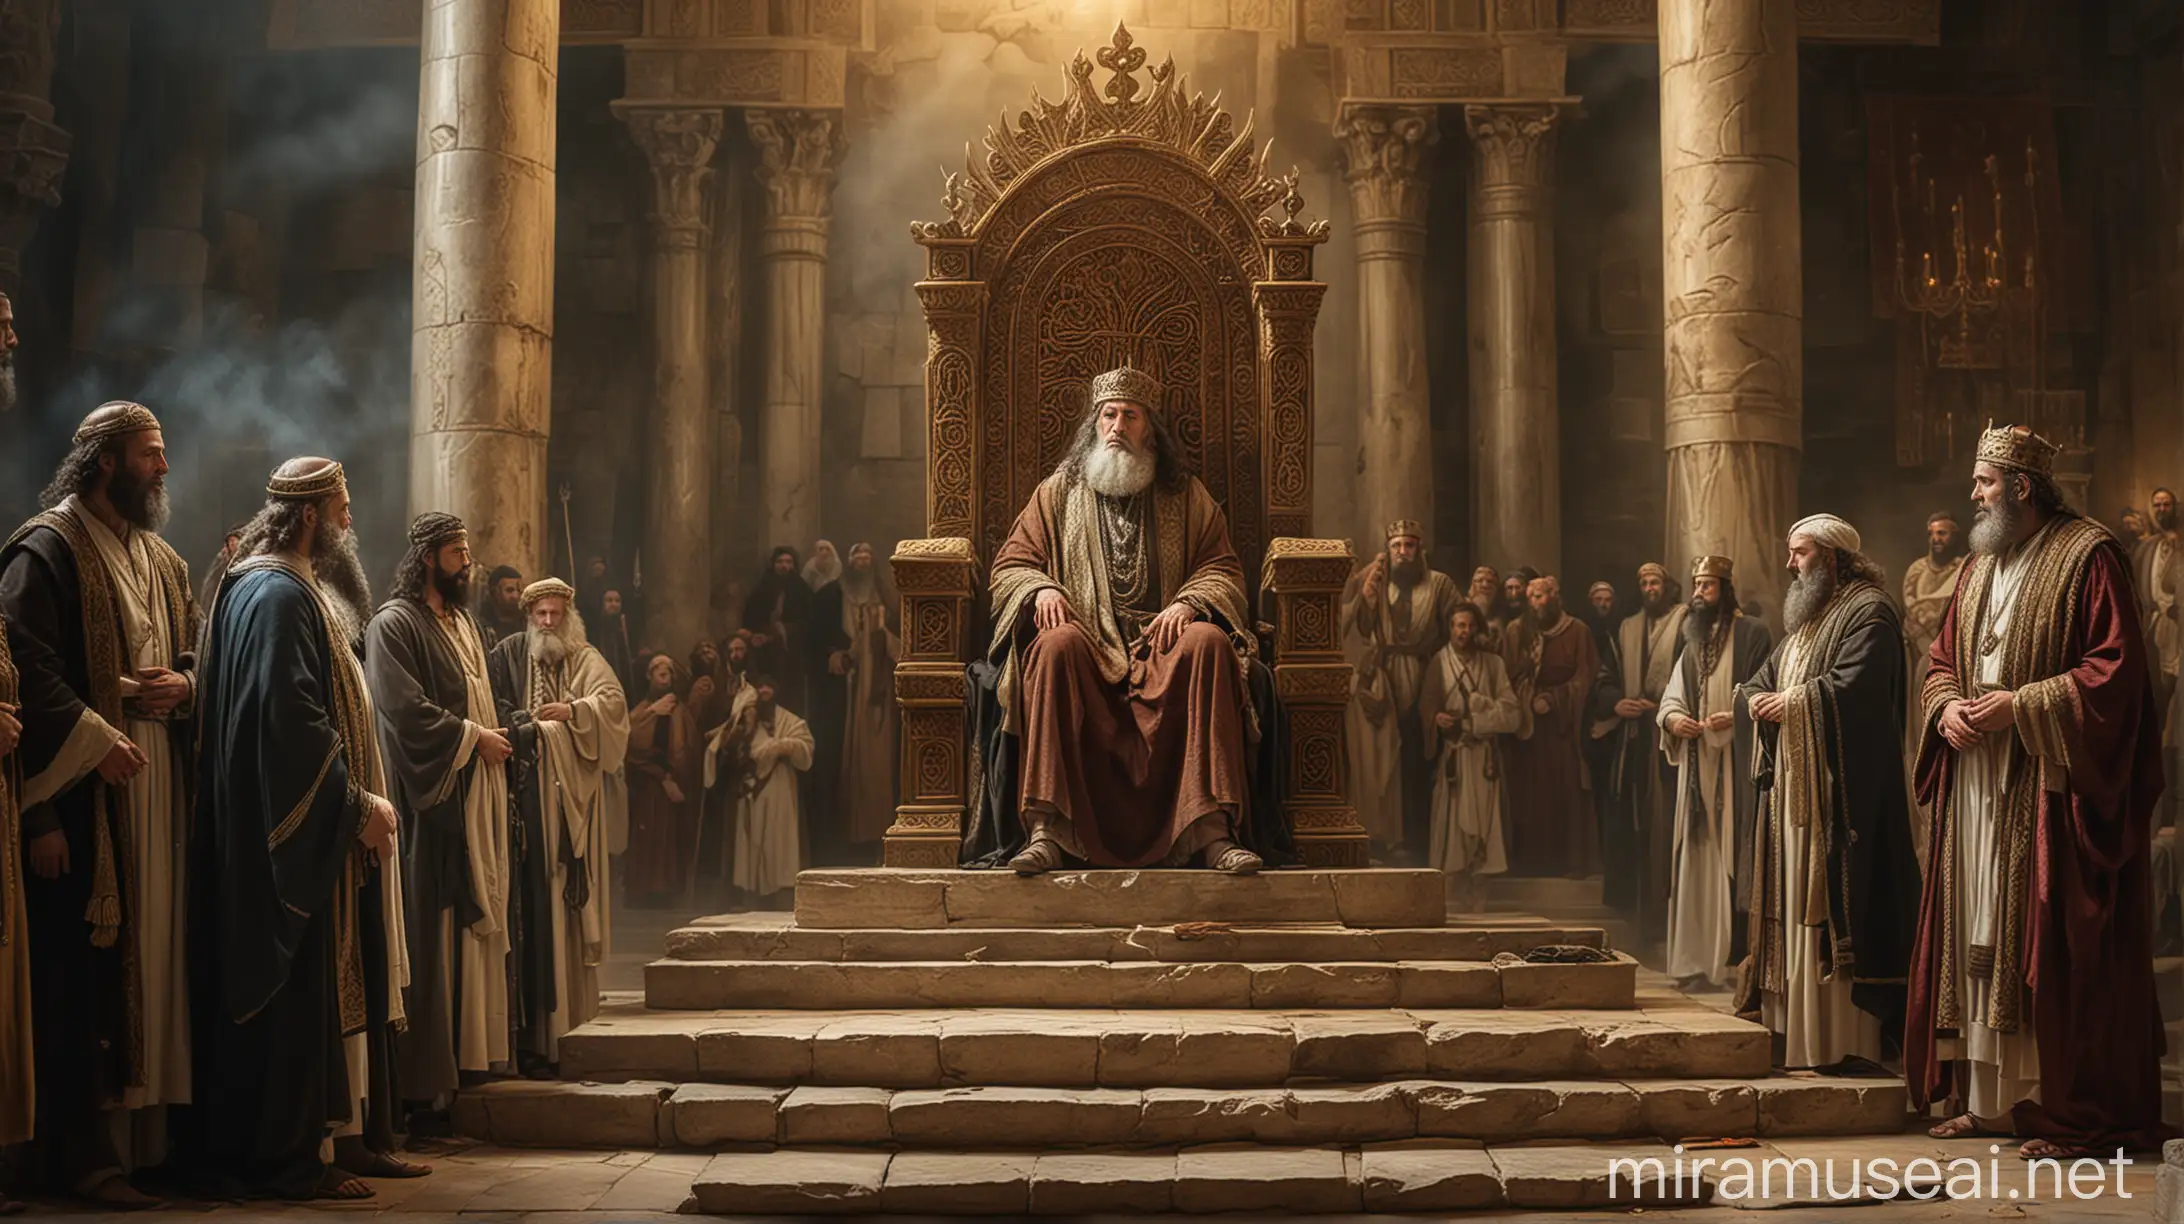 Ancient Jewish Prophet Confronting Wicked King on Throne